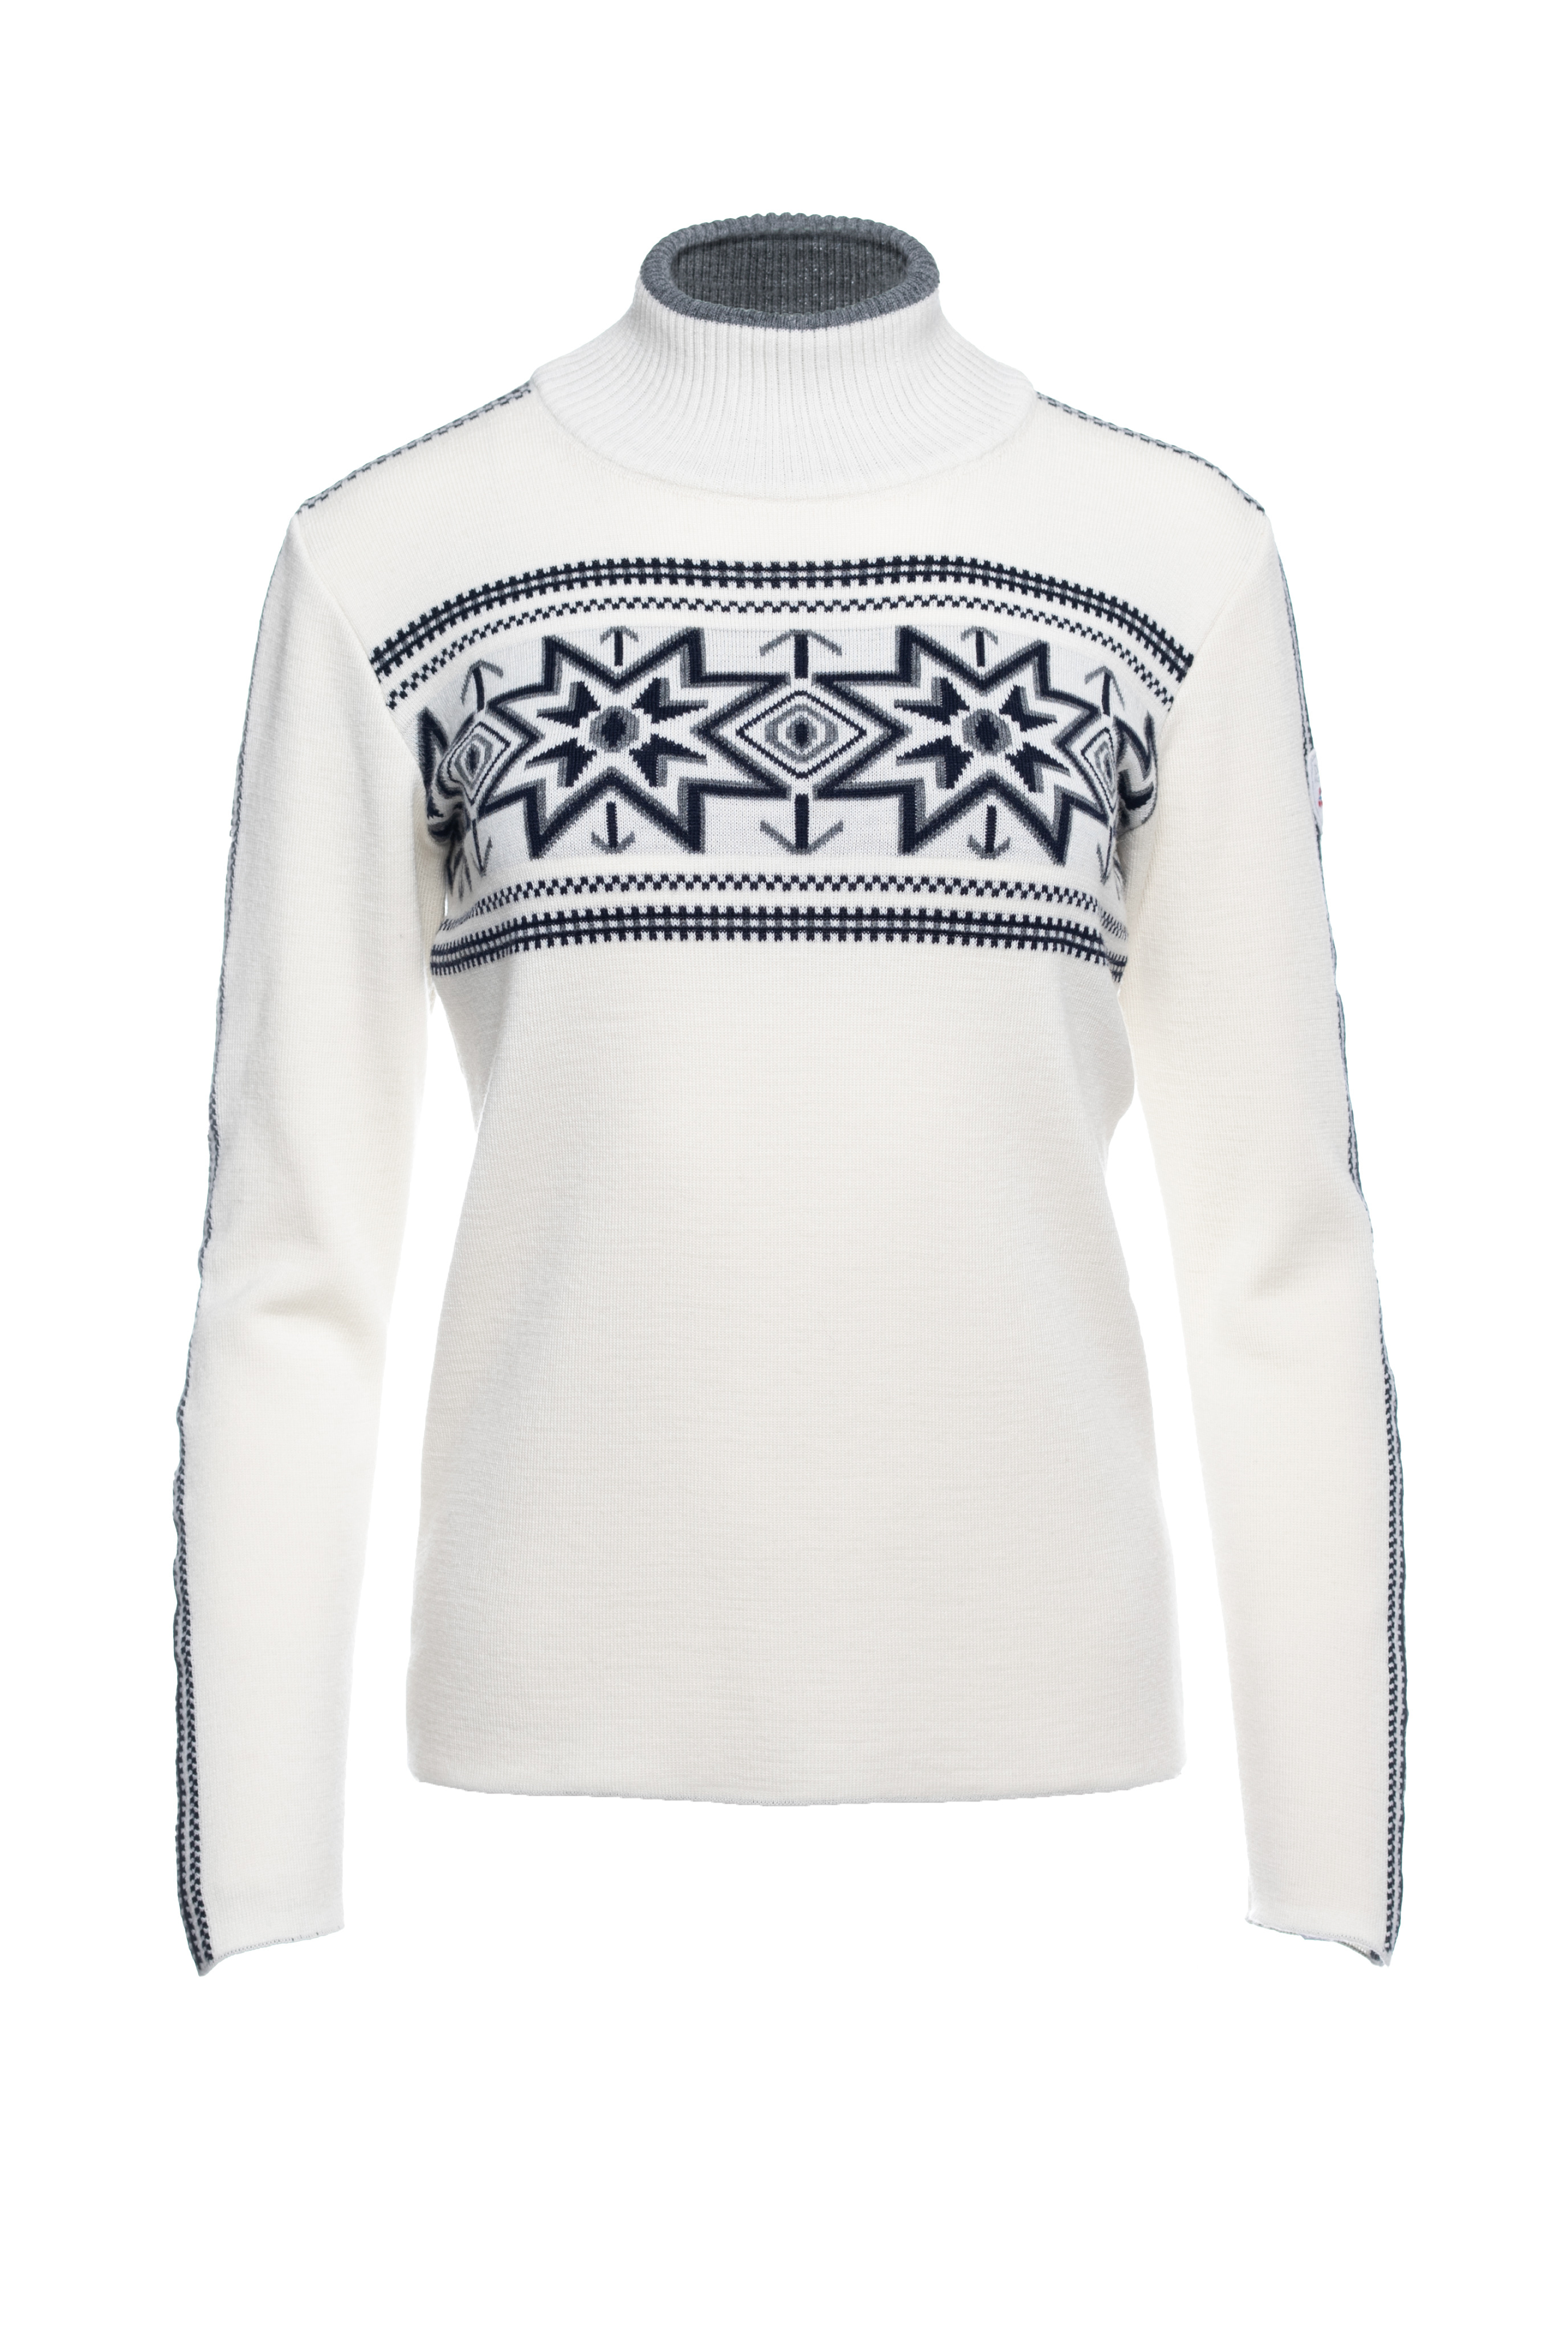 Tindefjell Sweater - Women - White - Dale of Norway - Dale of Norway